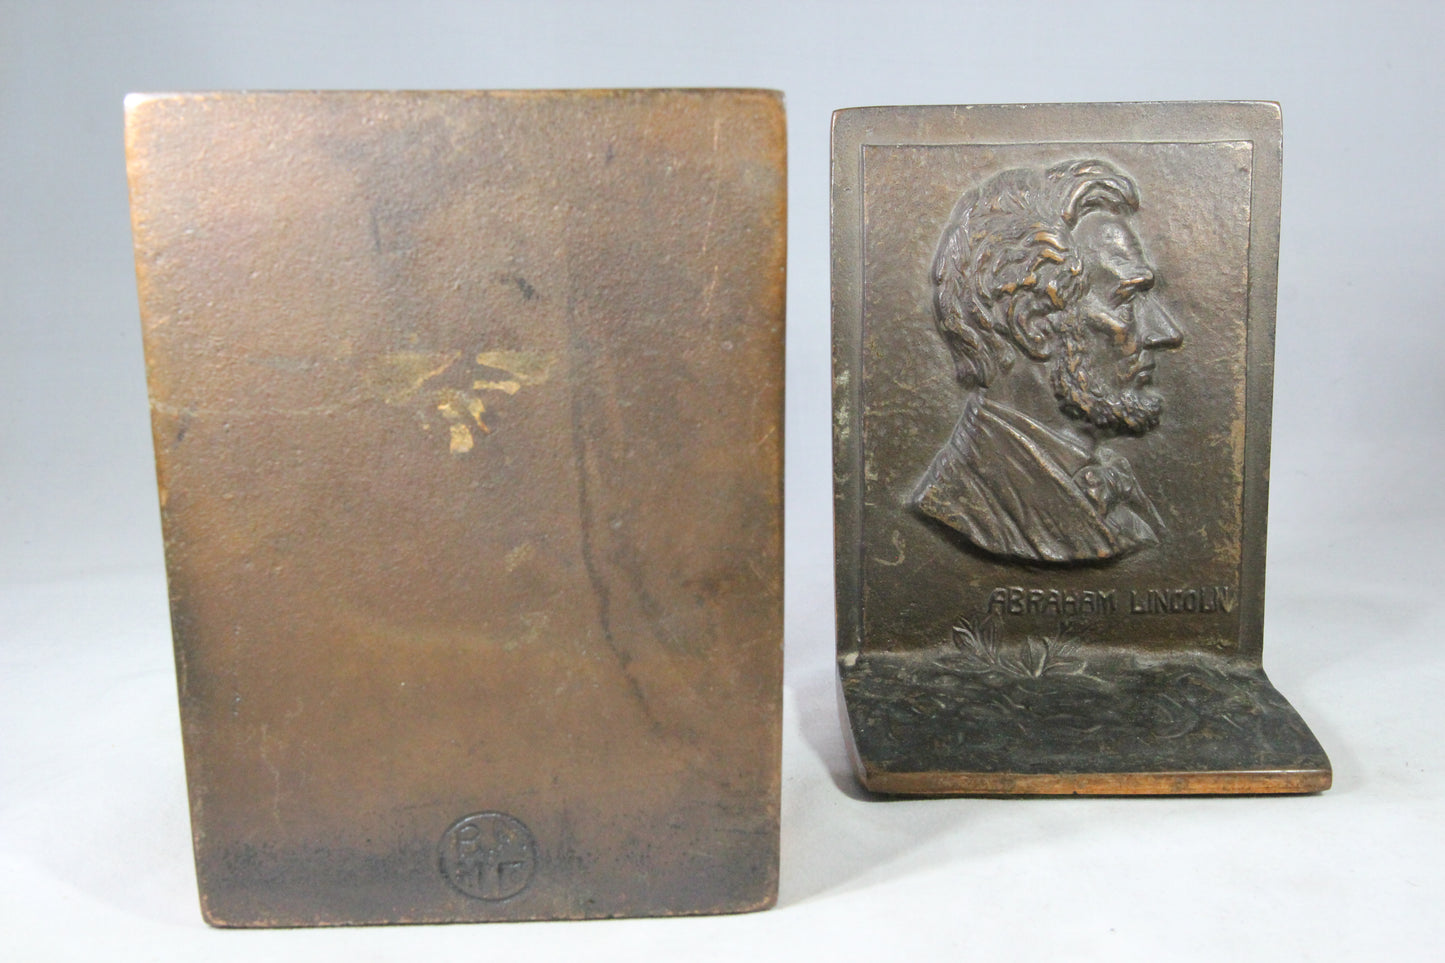 Cast Iron Abraham Lincoln Bookends